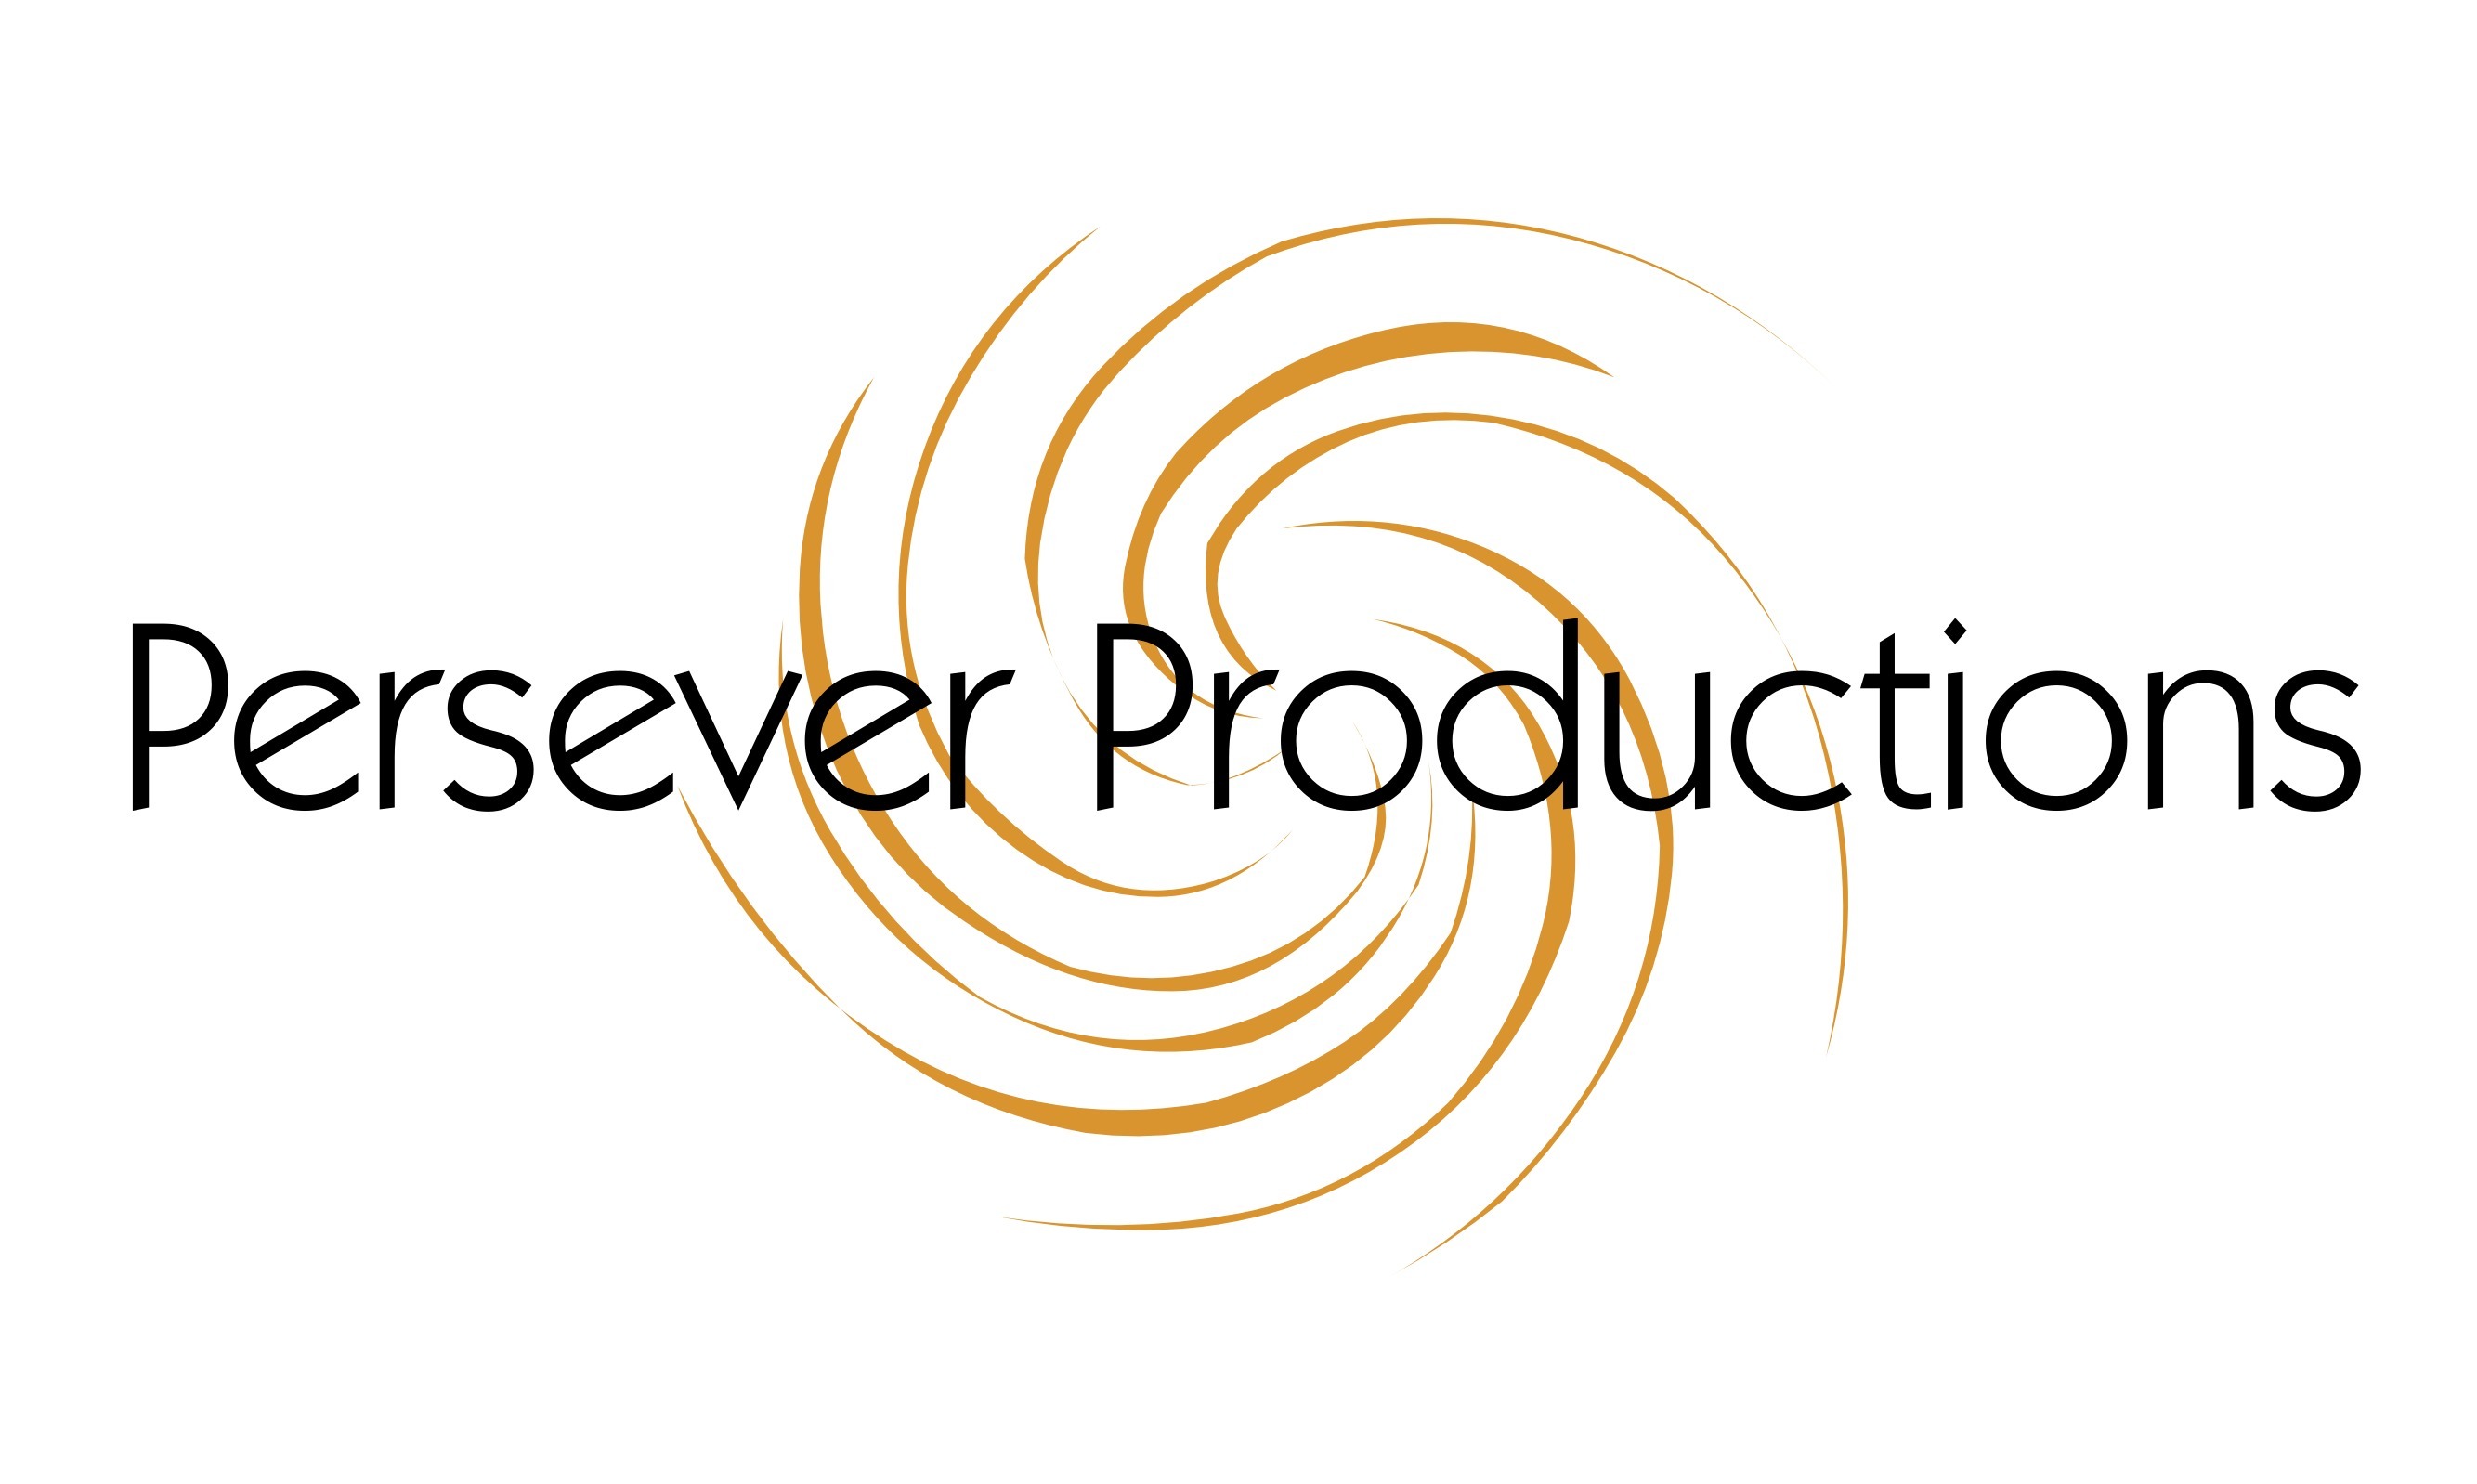 Persever Productions logo